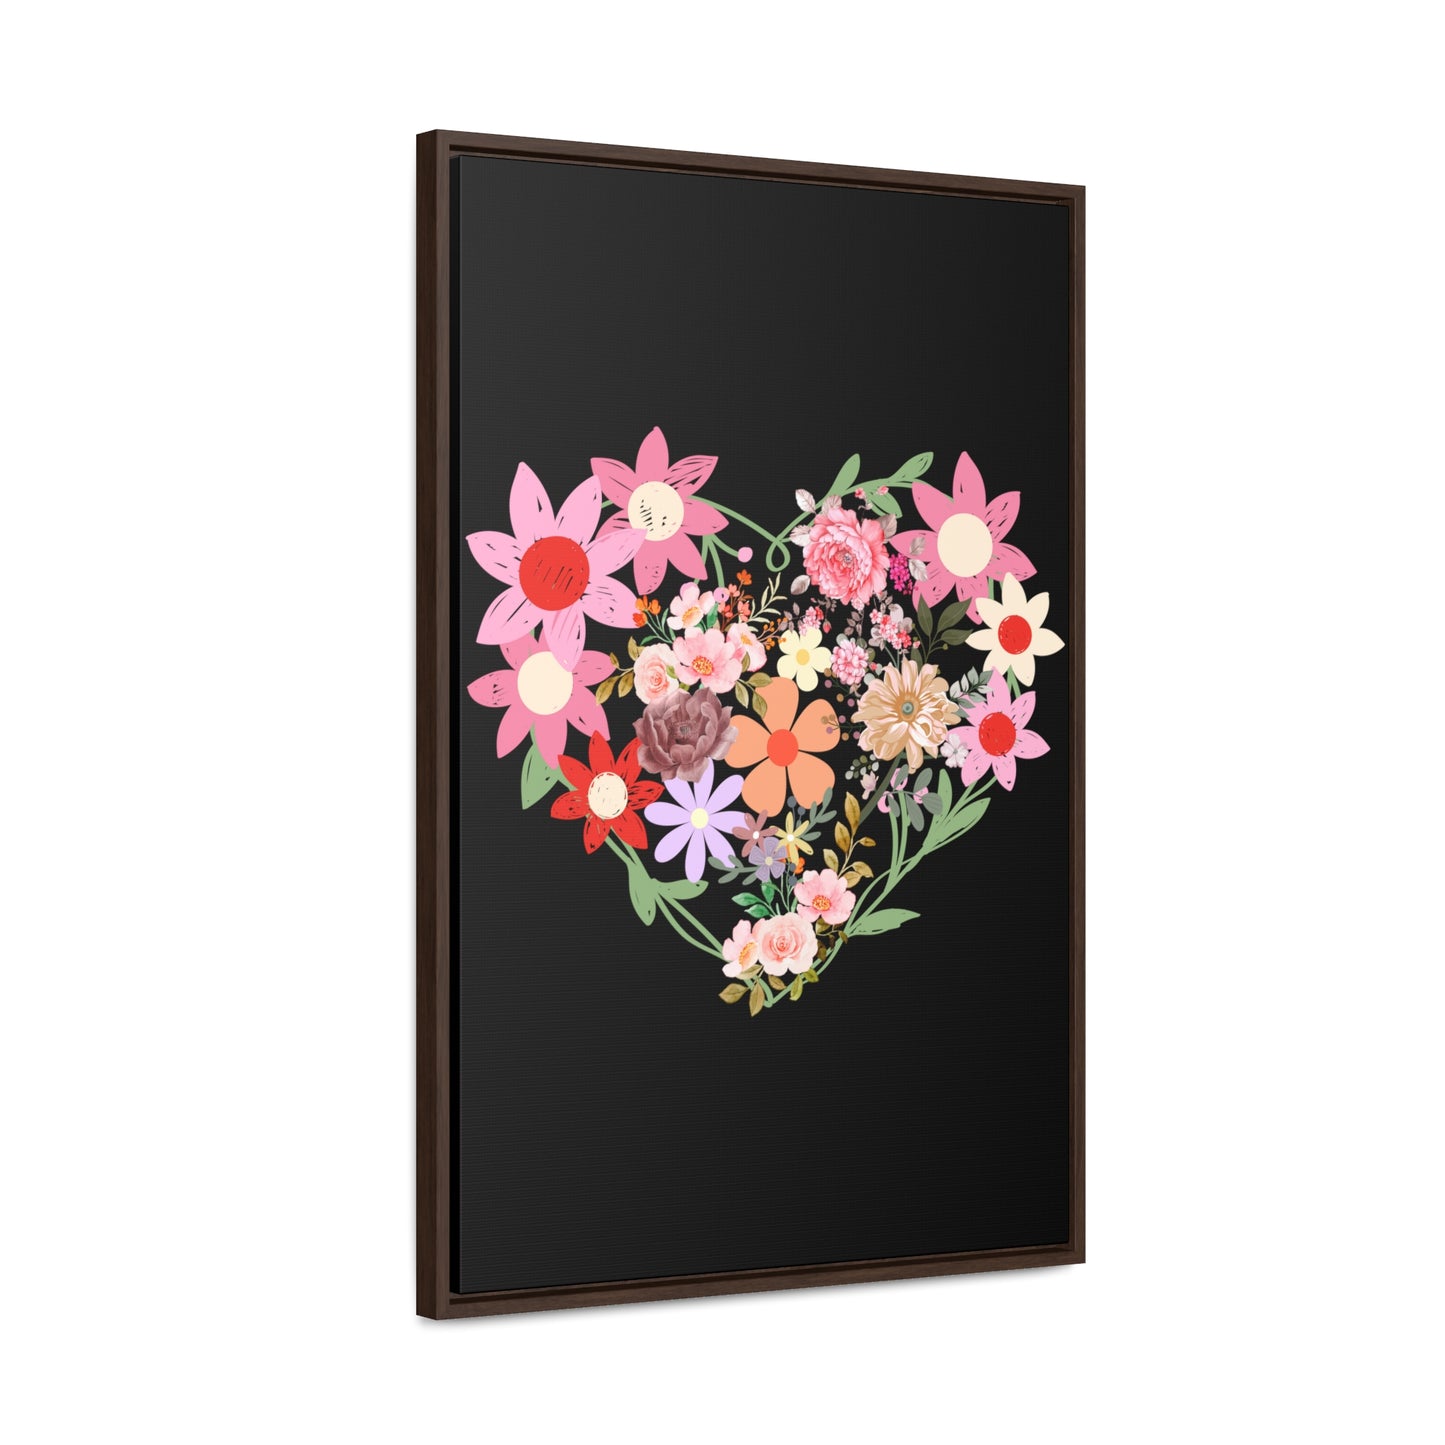 Wild Flower Heart Gallery Canvas Wraps, Home decorations, New house gift, Wall art, Home decor gift, house warming gift, home gifts,